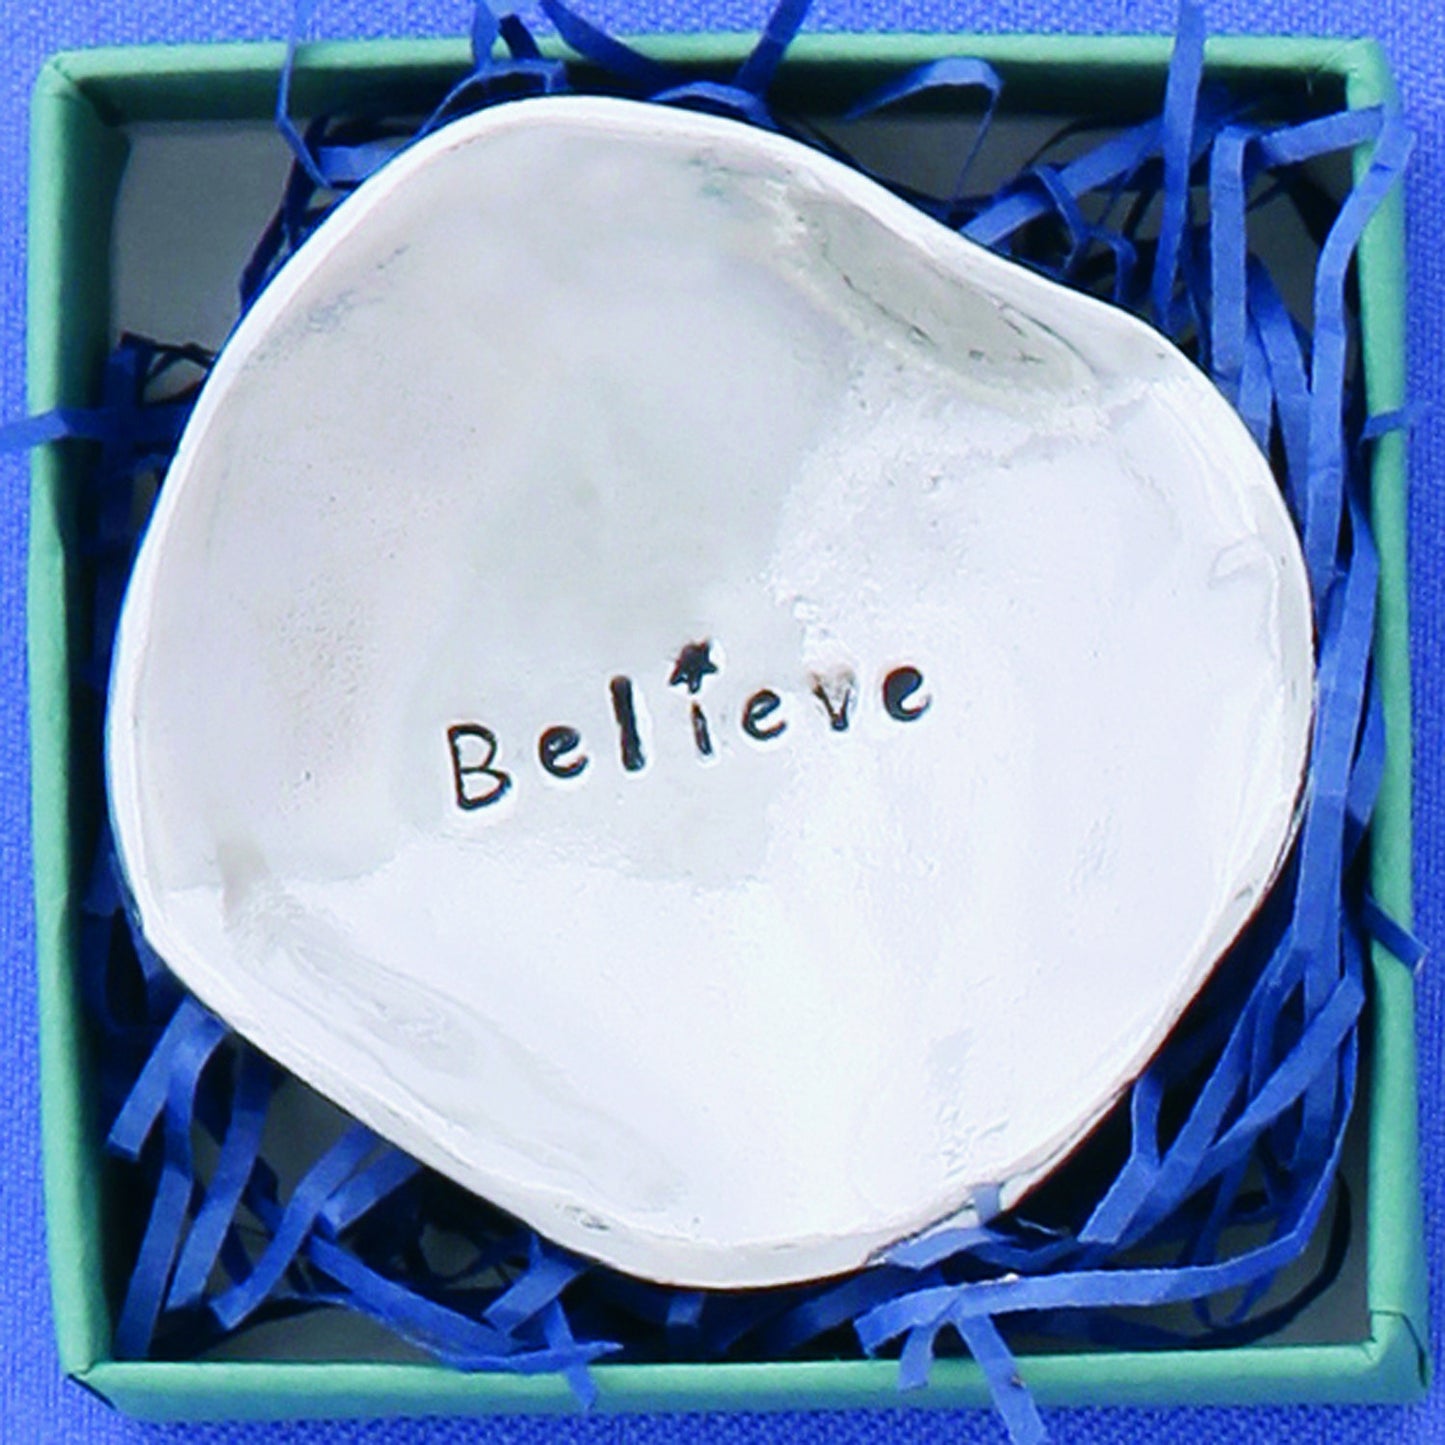 Pewter Trinket Dish "Believe" - small